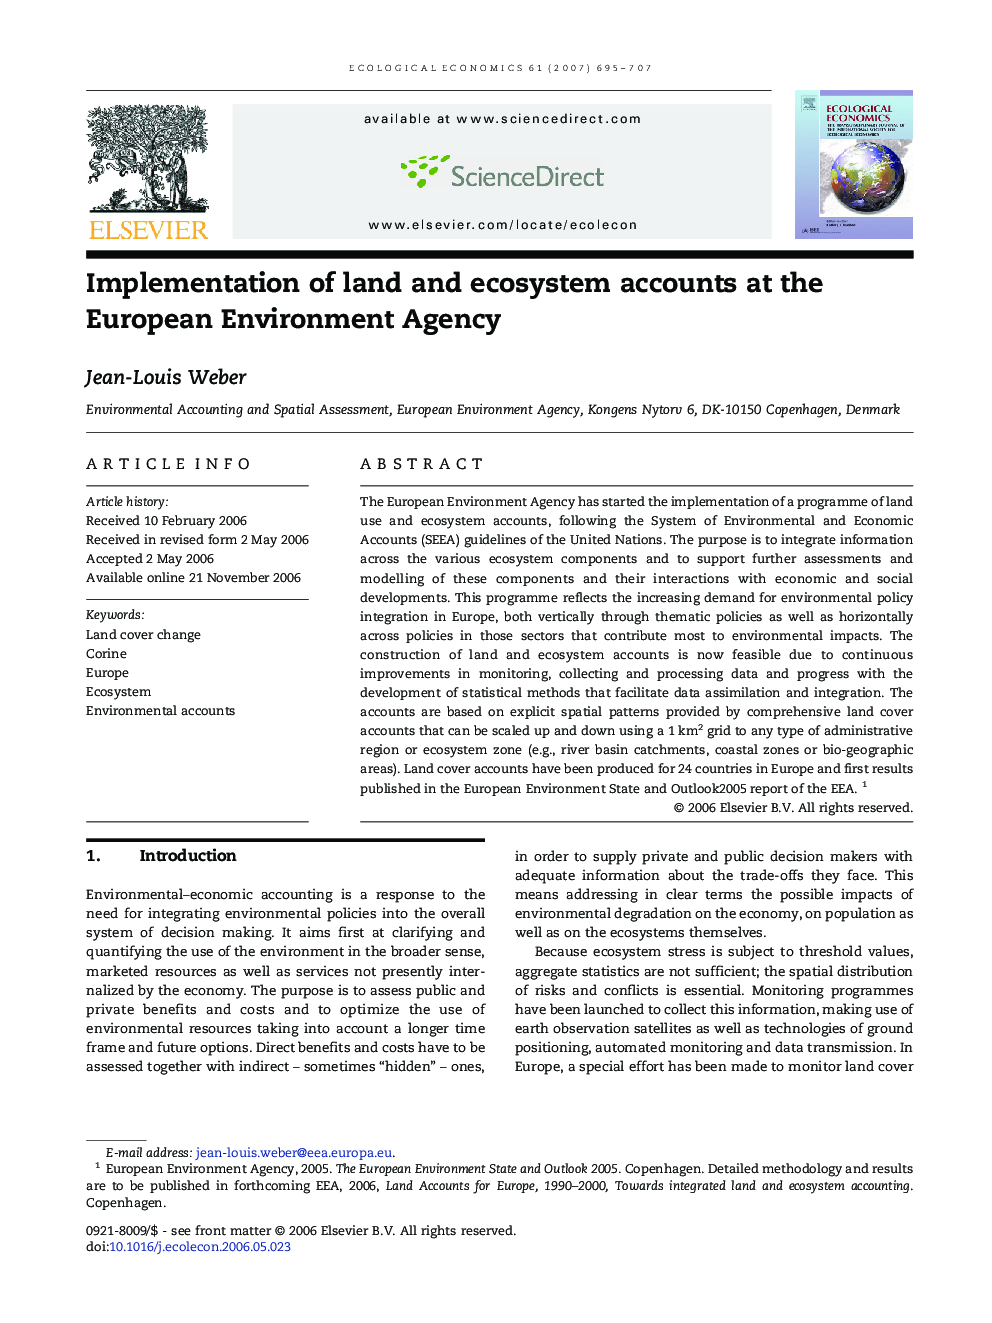 Implementation of land and ecosystem accounts at the European Environment Agency